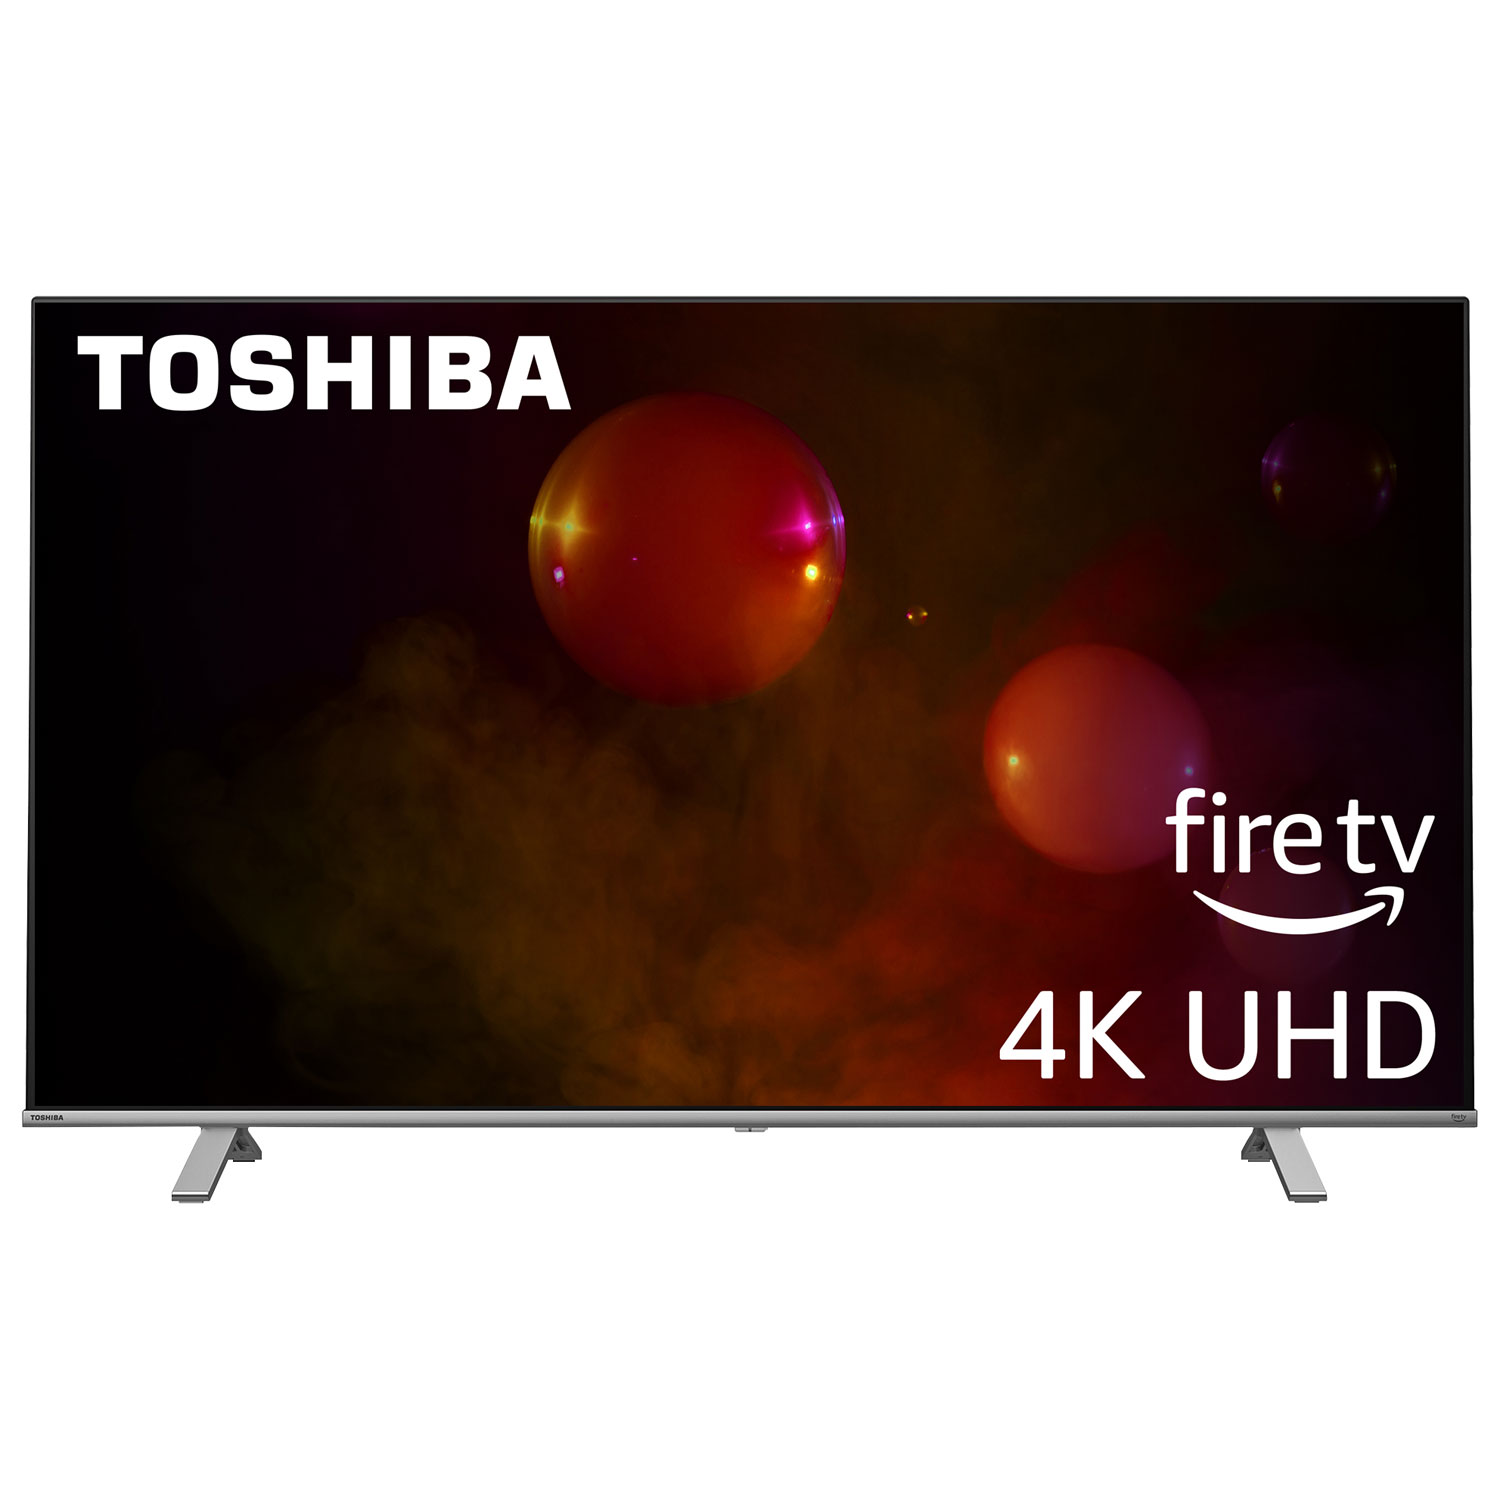 Toshiba 50" 4K UHD HDR LED Smart TV (50C350KC) - Fire TV Edition - 2021 - Only at Best Buy